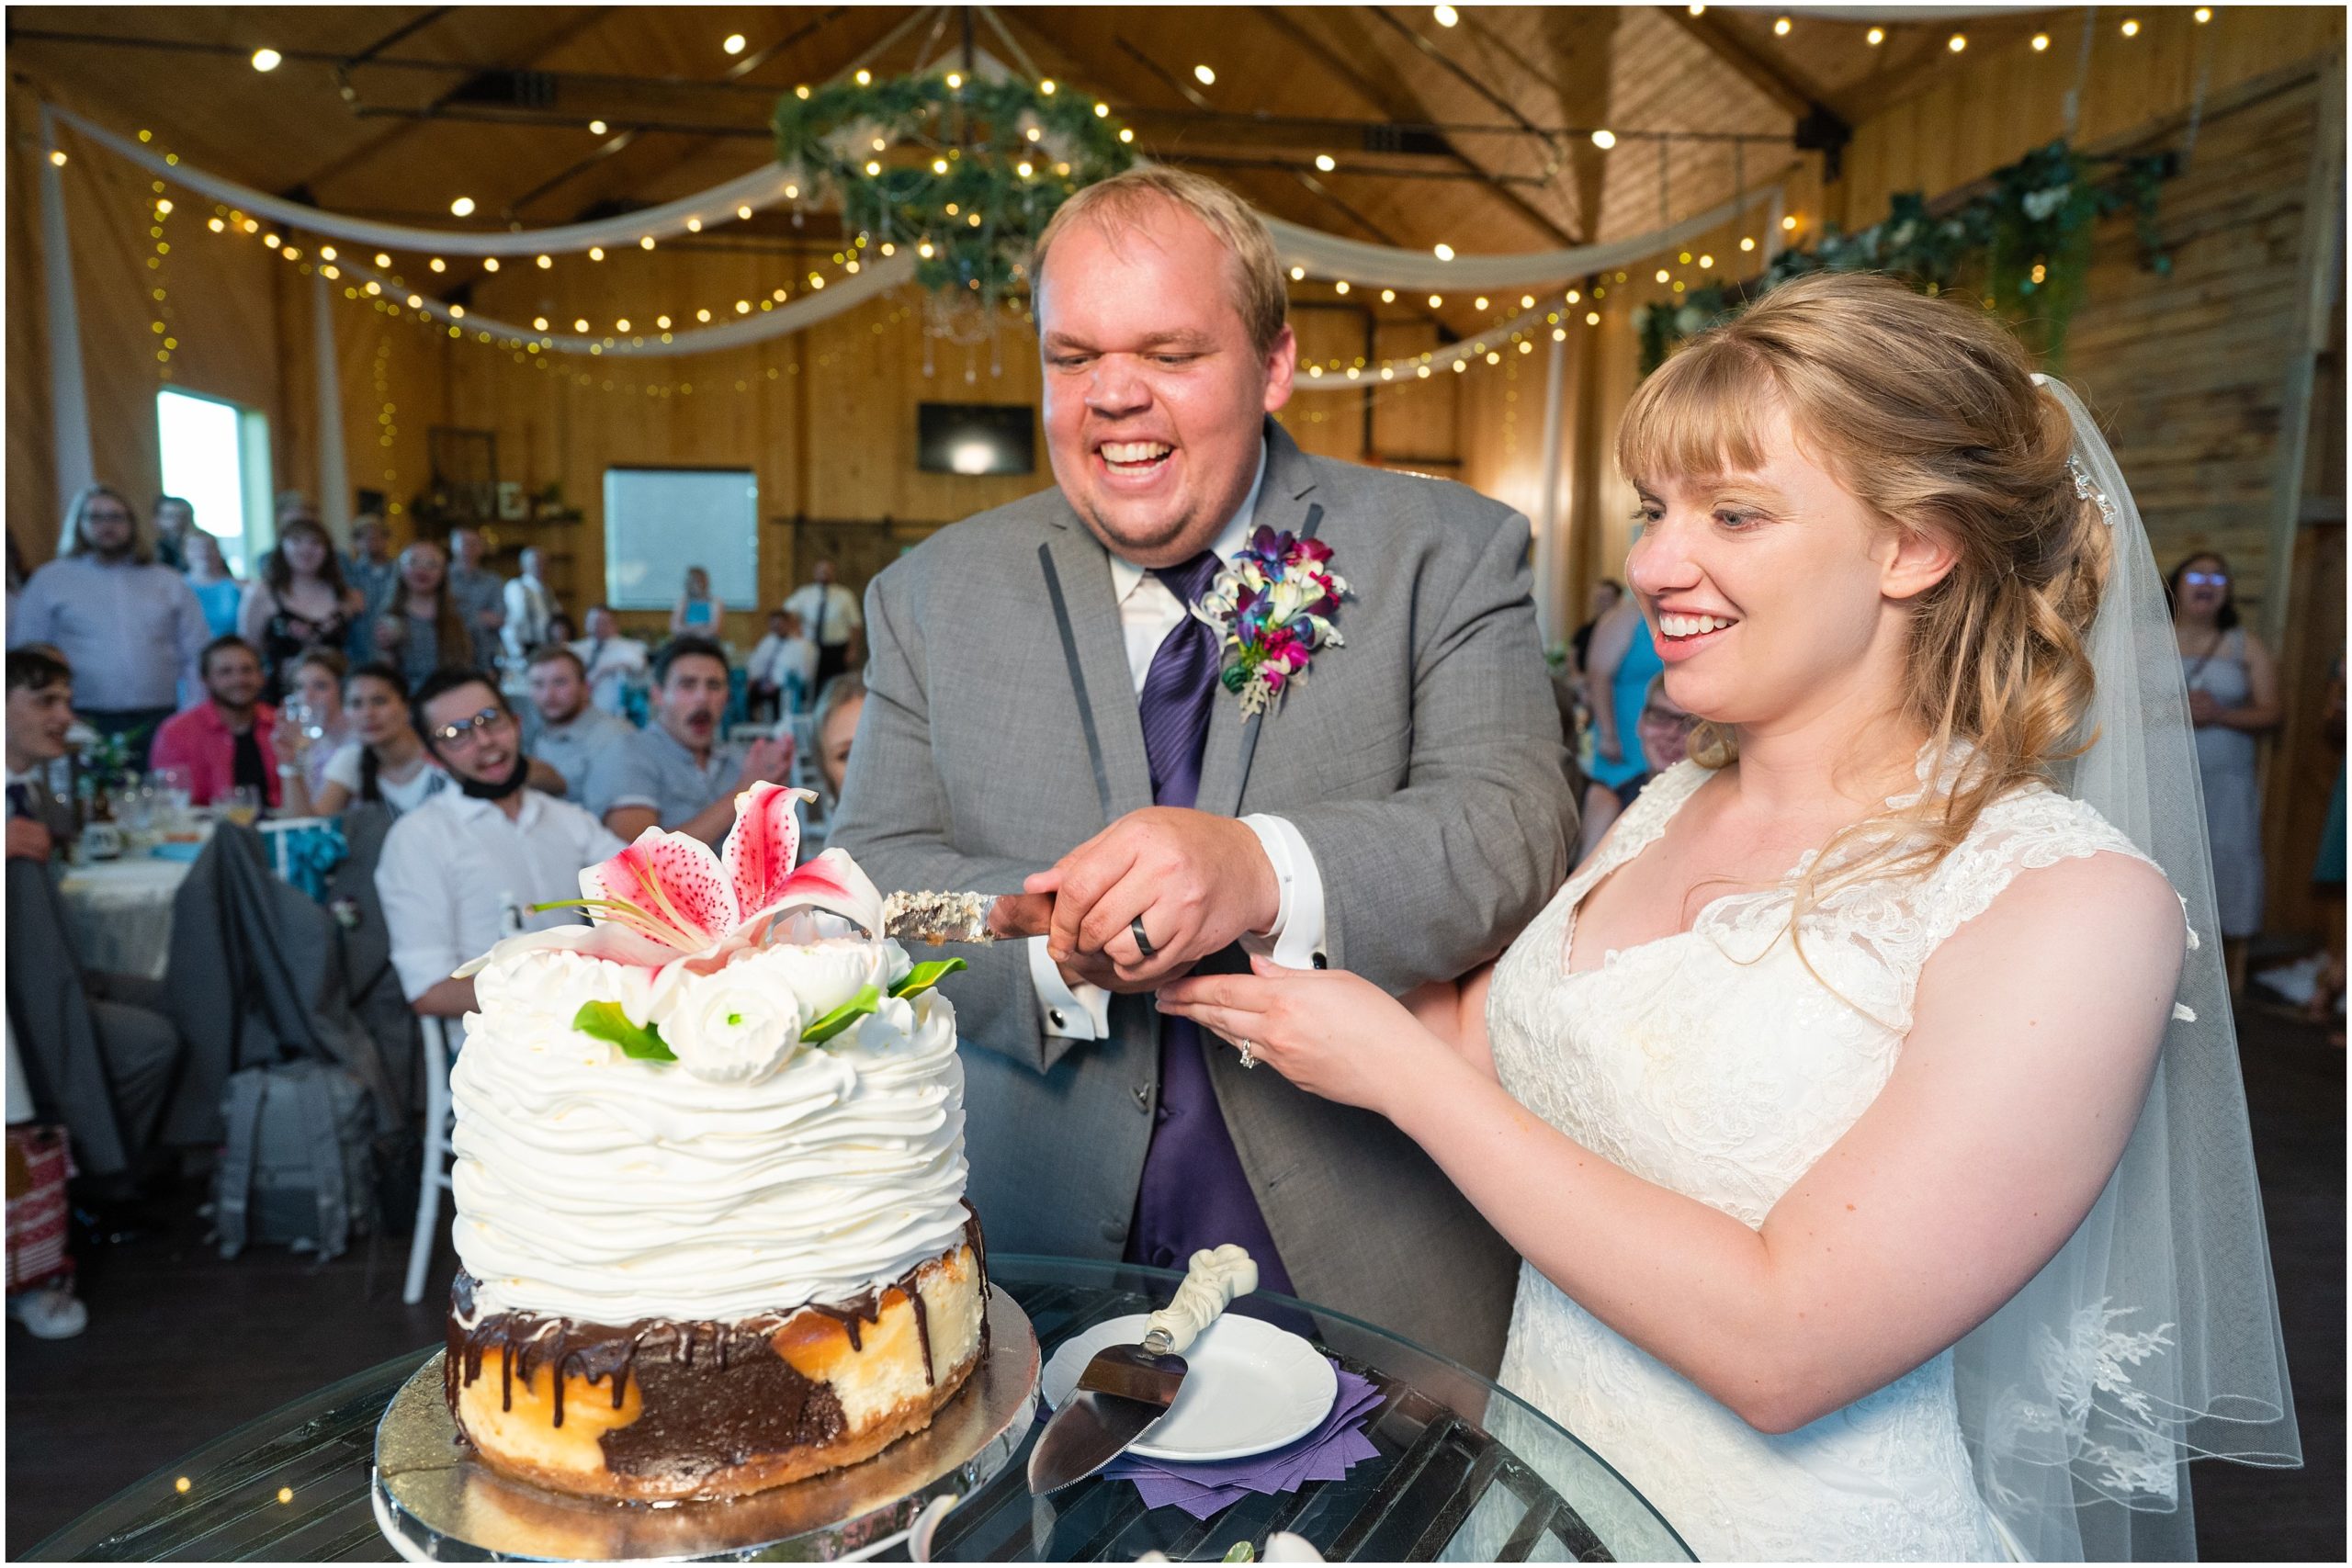 Cake cutting in a barn | Orchid Inspired Summer Wedding at Oak Hills Utah | Jessie and Dallin Photography